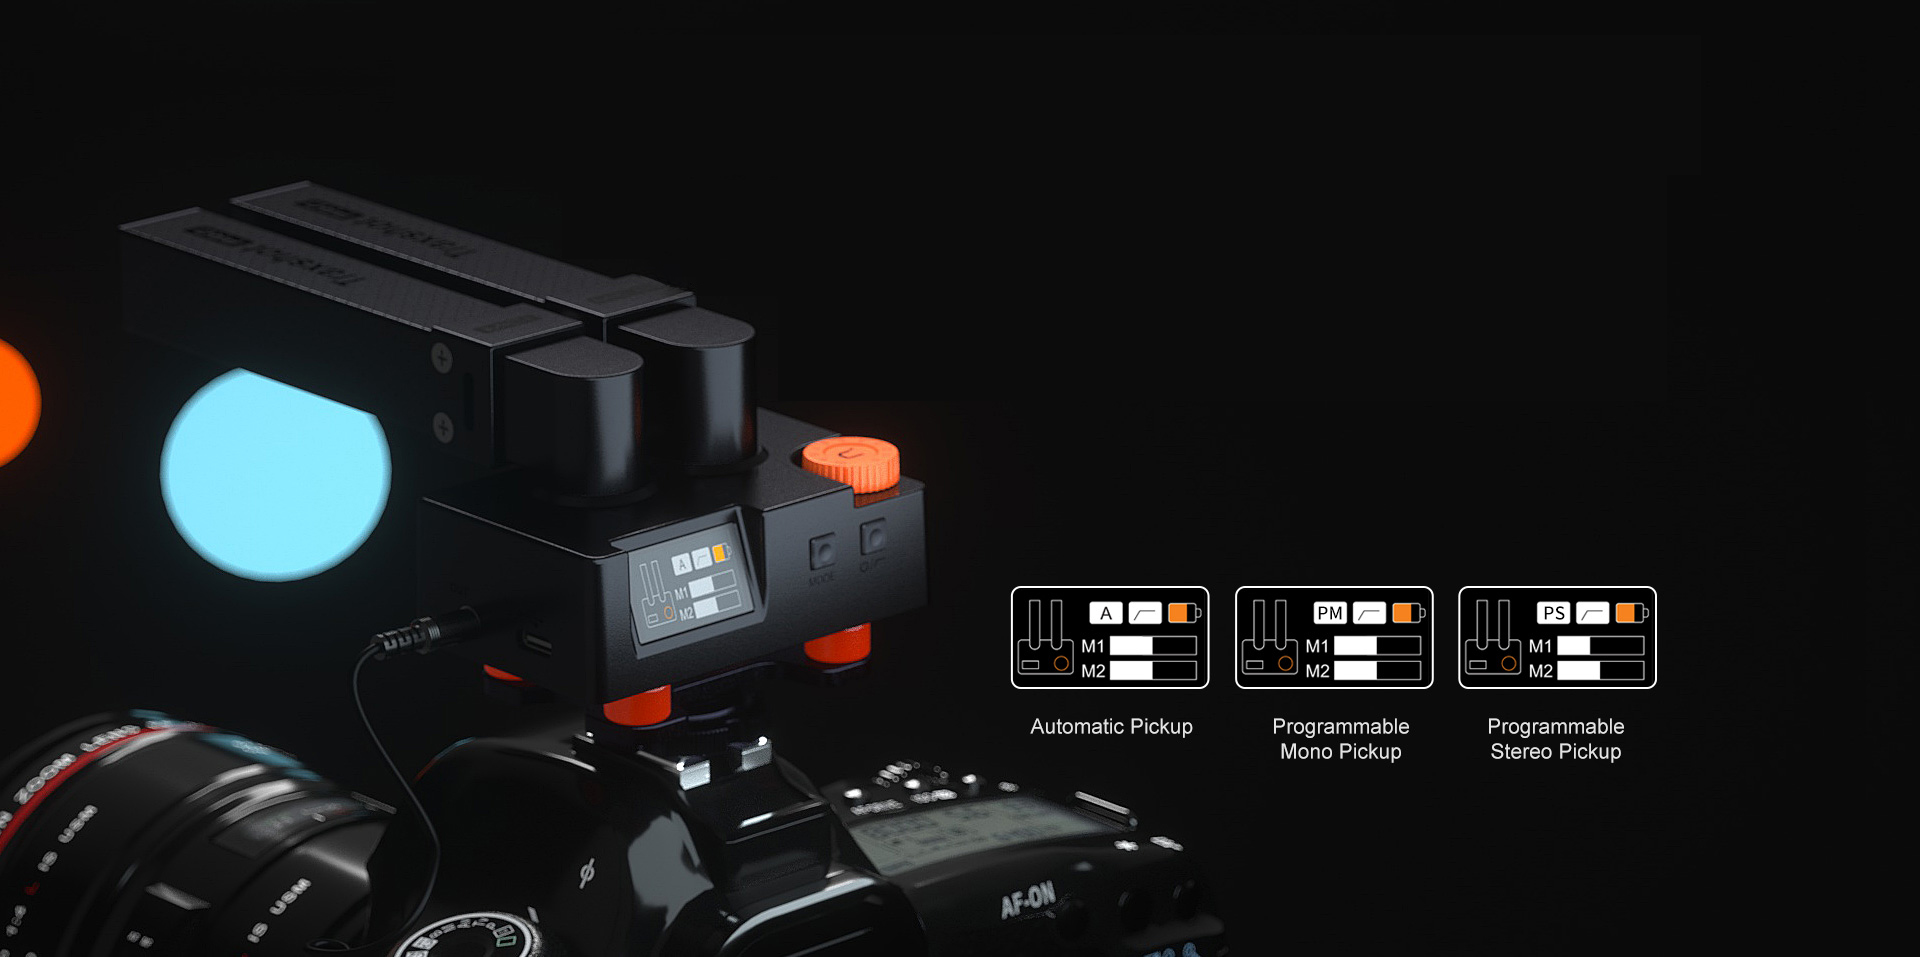 Automatic/Programmable Manual Multi-pickup Modes with Intelligent Switch